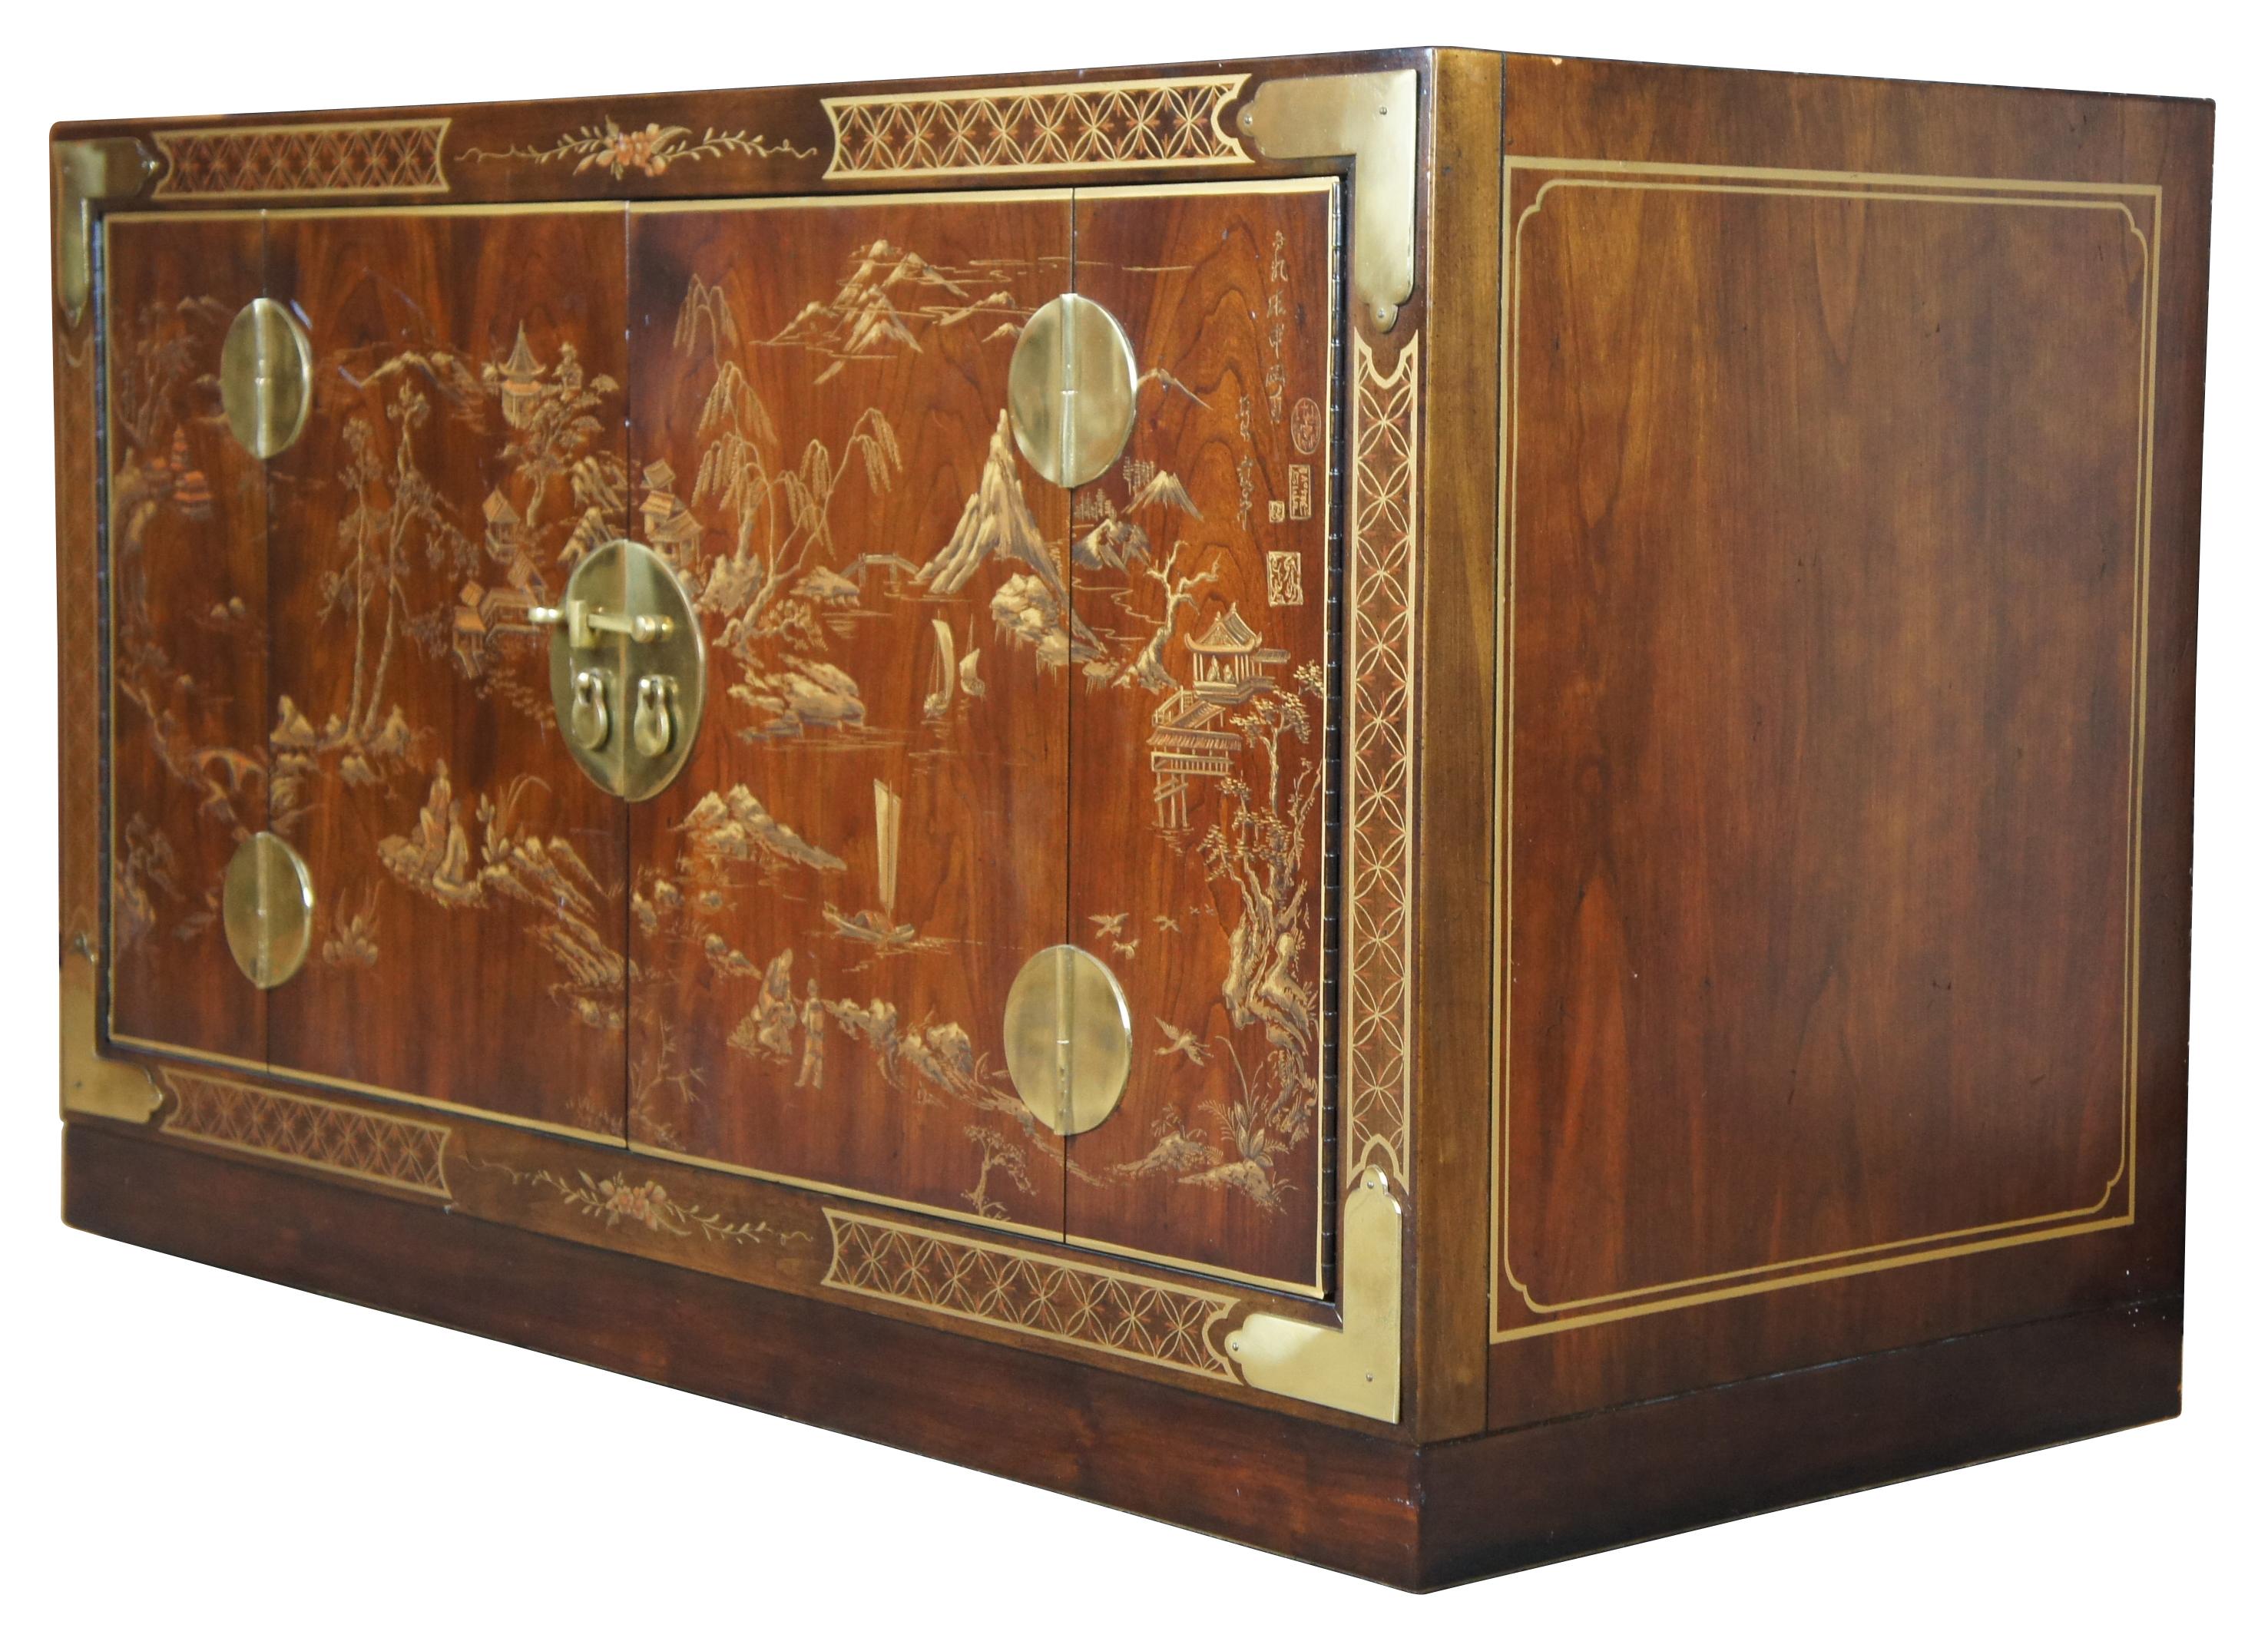 Rare 1977 Drexel Heritage Et Cetera chinoiserie console cabinet. Made of a rosewood veneer with rectangular form featuring brass accents, central medallion and hand painted gold details showing Asian landscape of figures, pagodas, water, mountains,